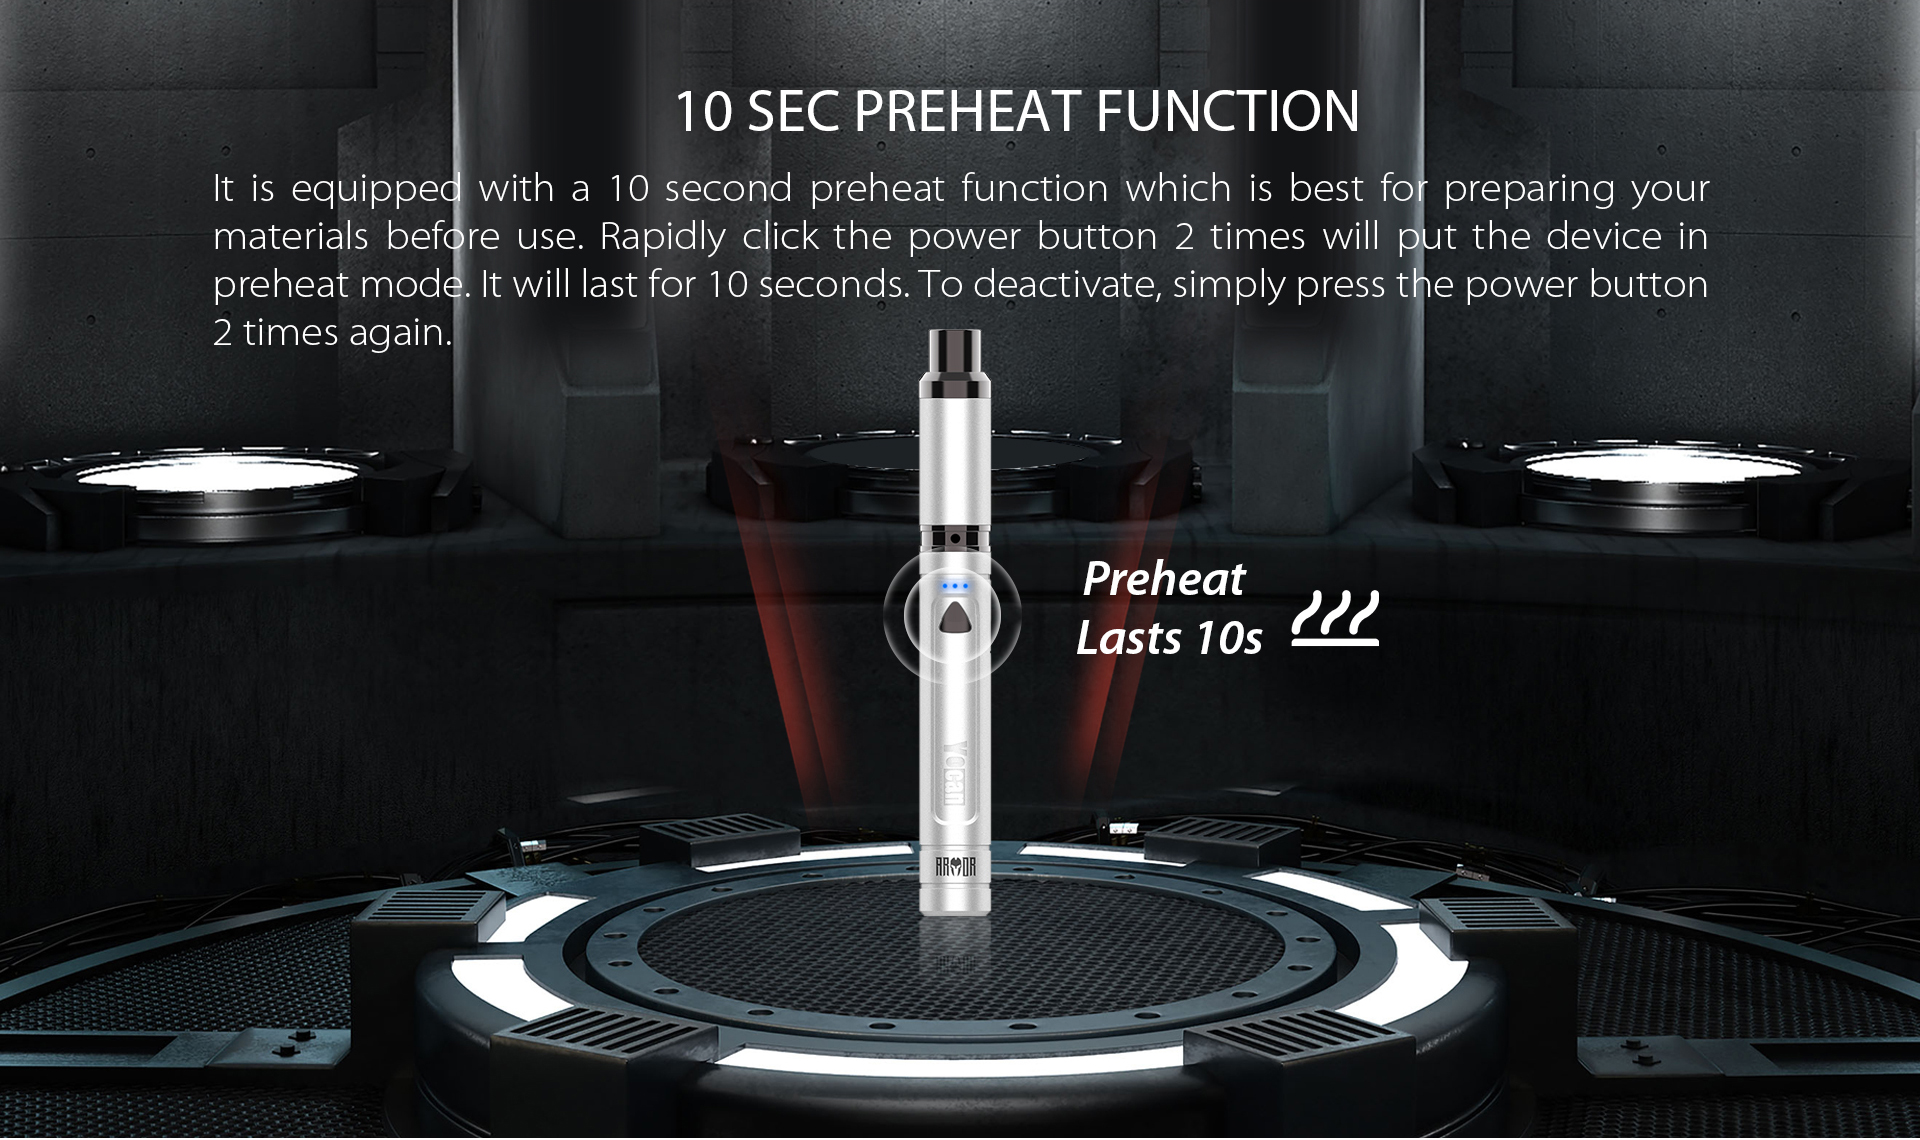 Yocan Armor Vaporizer pen is equipped with a 10 second preheat function